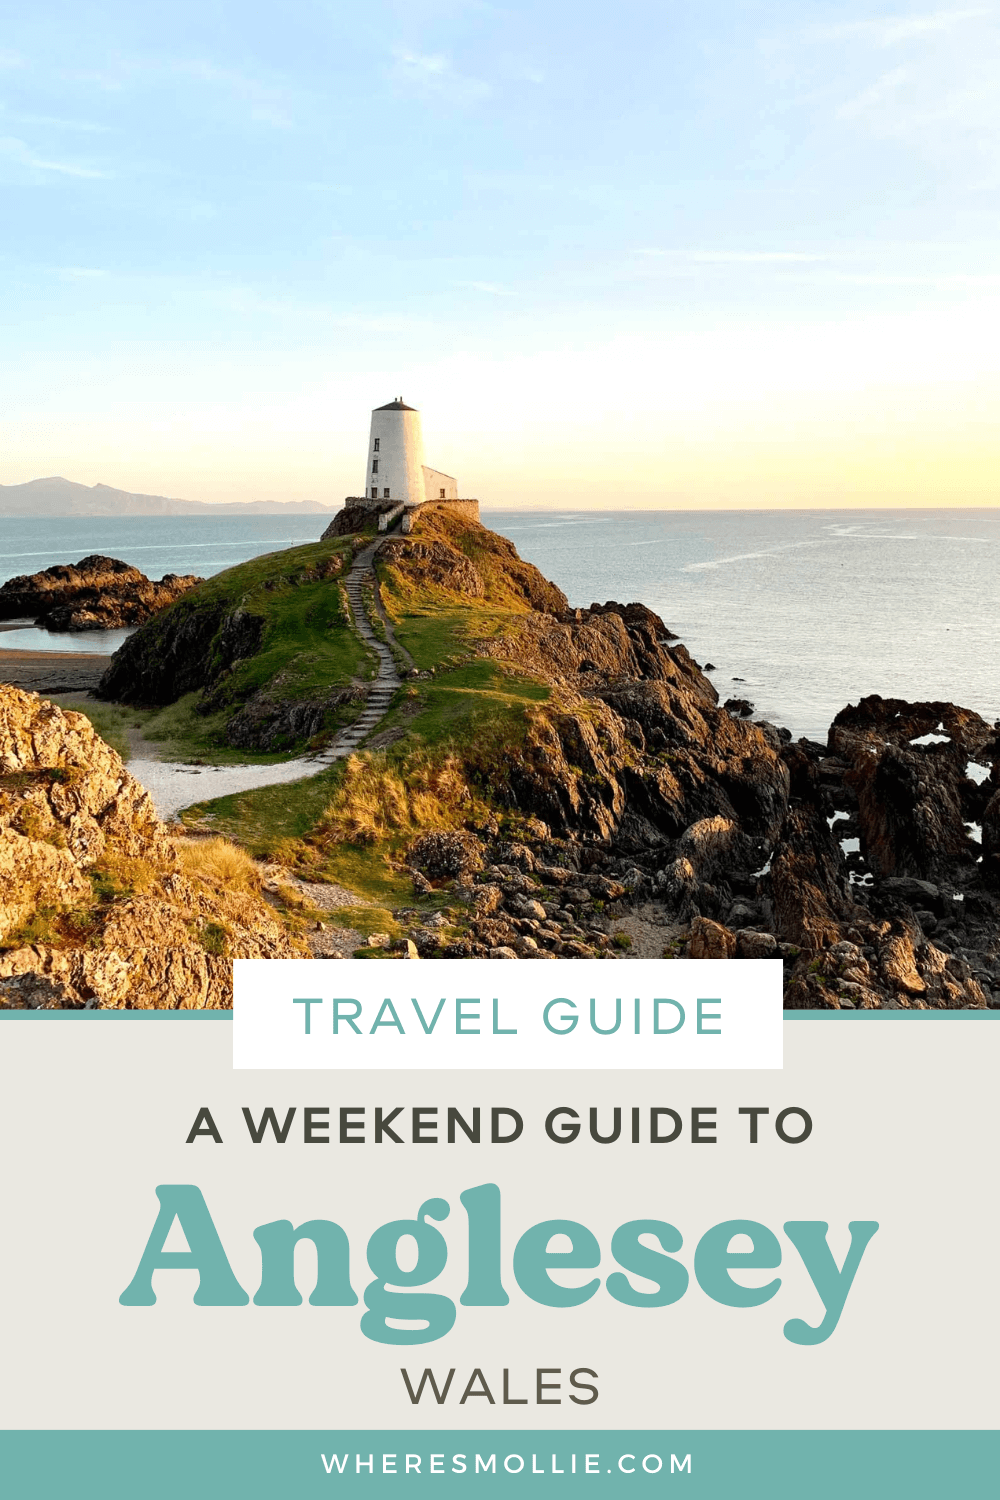 A weekend guide to Anglesey, Wales